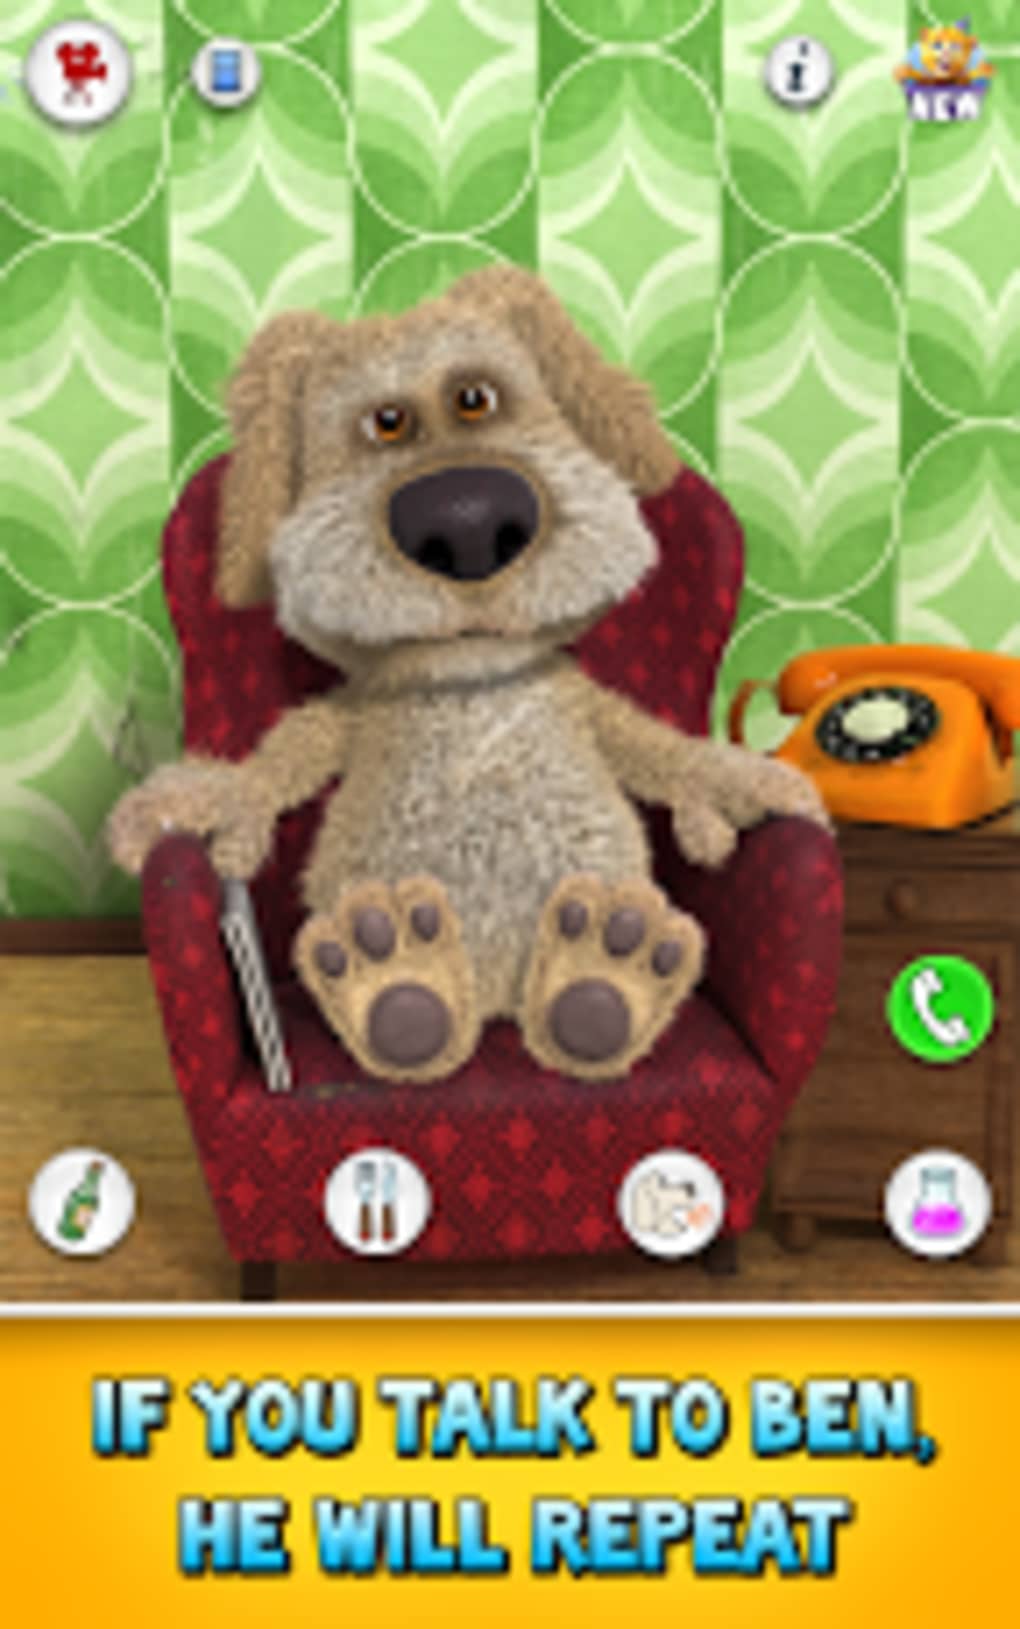 Talking Ben the Dog APK - Free download for Android